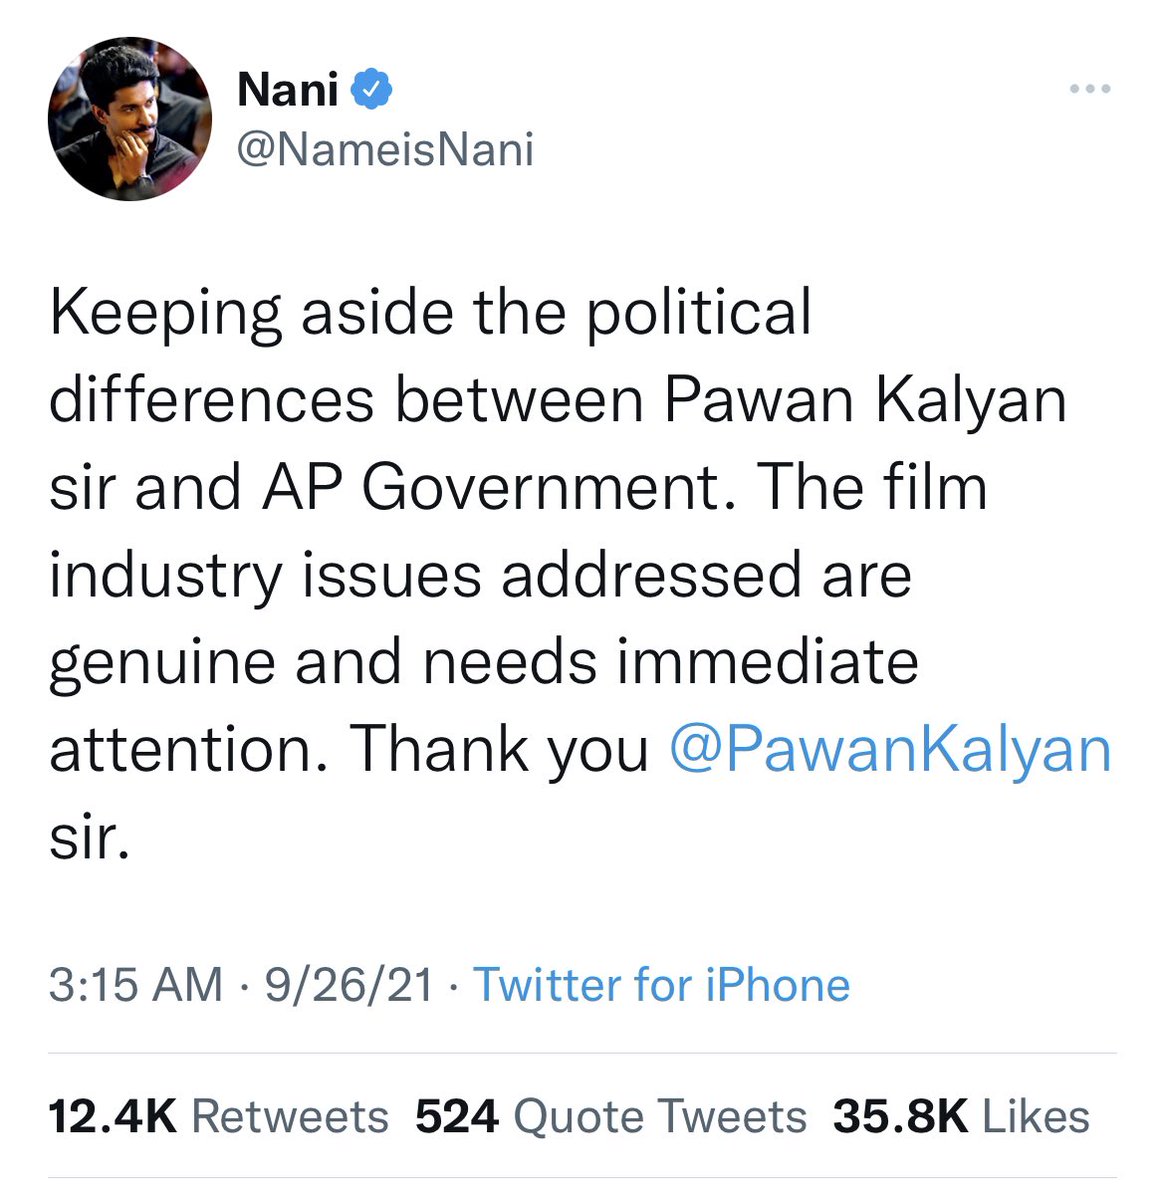 Two more heroes @nameisnani @ActorKartikeya voiced their support to the Film industry issues raised by @PawanKalyan !